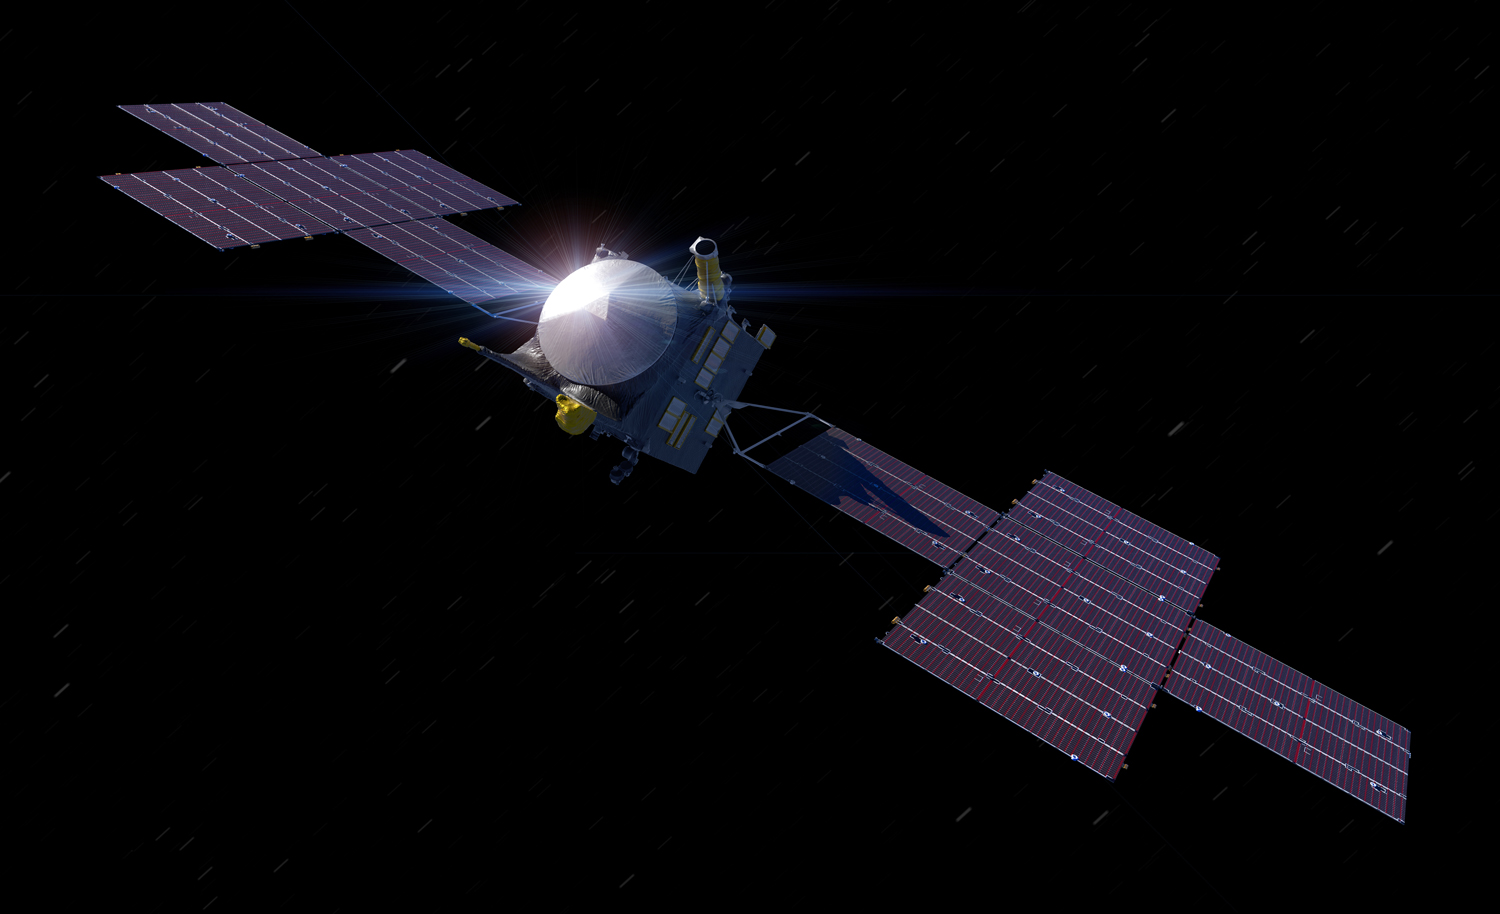 A spacecraft with solar panels in space.